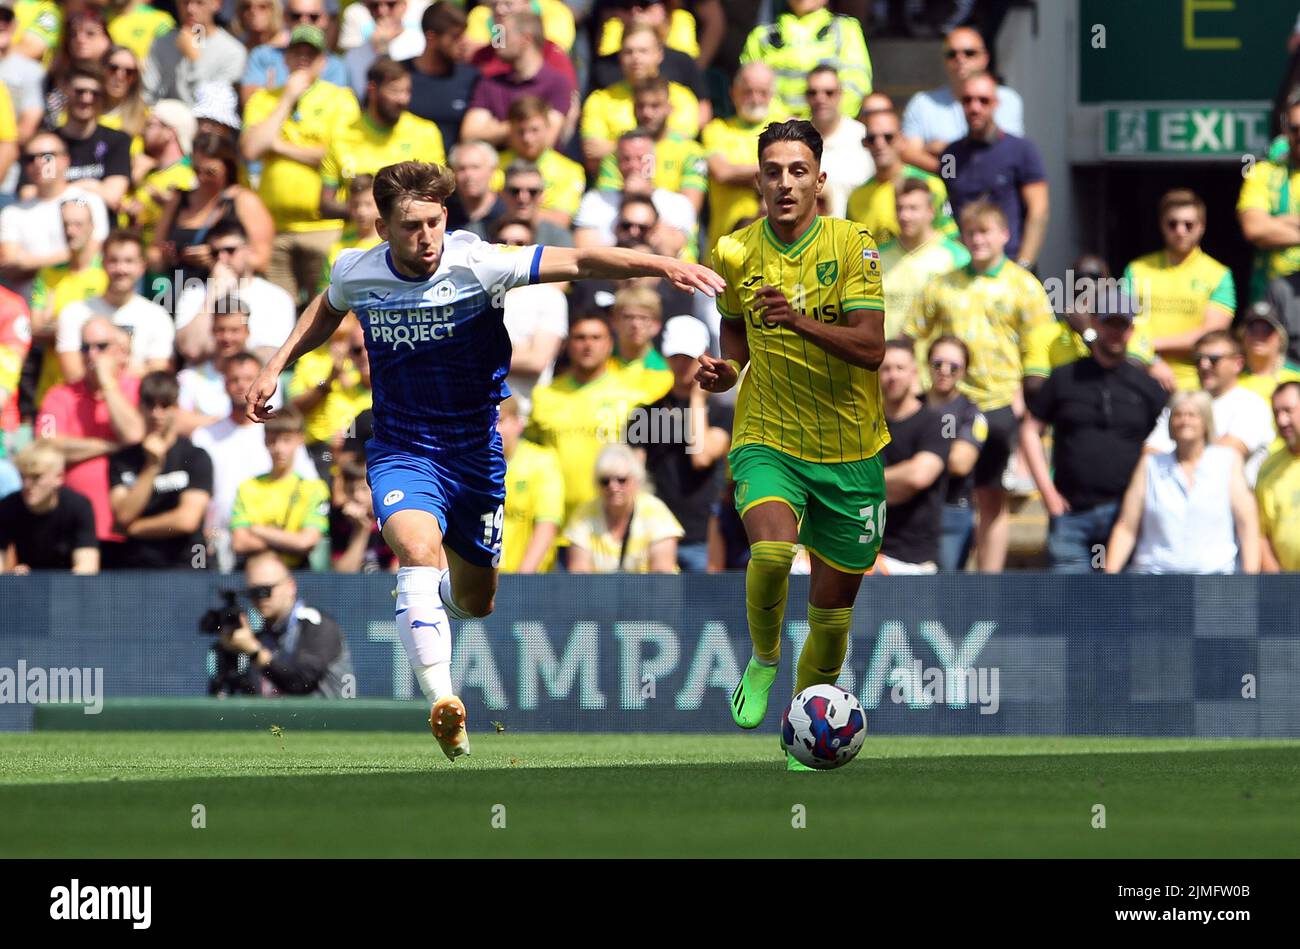 Norwich, UK. 06th Aug, 2022. Dimitris Giannoulis of Norwich City runs with the ball and is chased by Callum Lang of Wigan Athletic during the Sky Bet Championship match between Norwich City and Wigan Athletic at Carrow Road on August 6th 2022 in Norwich, England. (Photo by Mick Kearns/phcimages.com) Credit: PHC Images/Alamy Live News Stock Photo